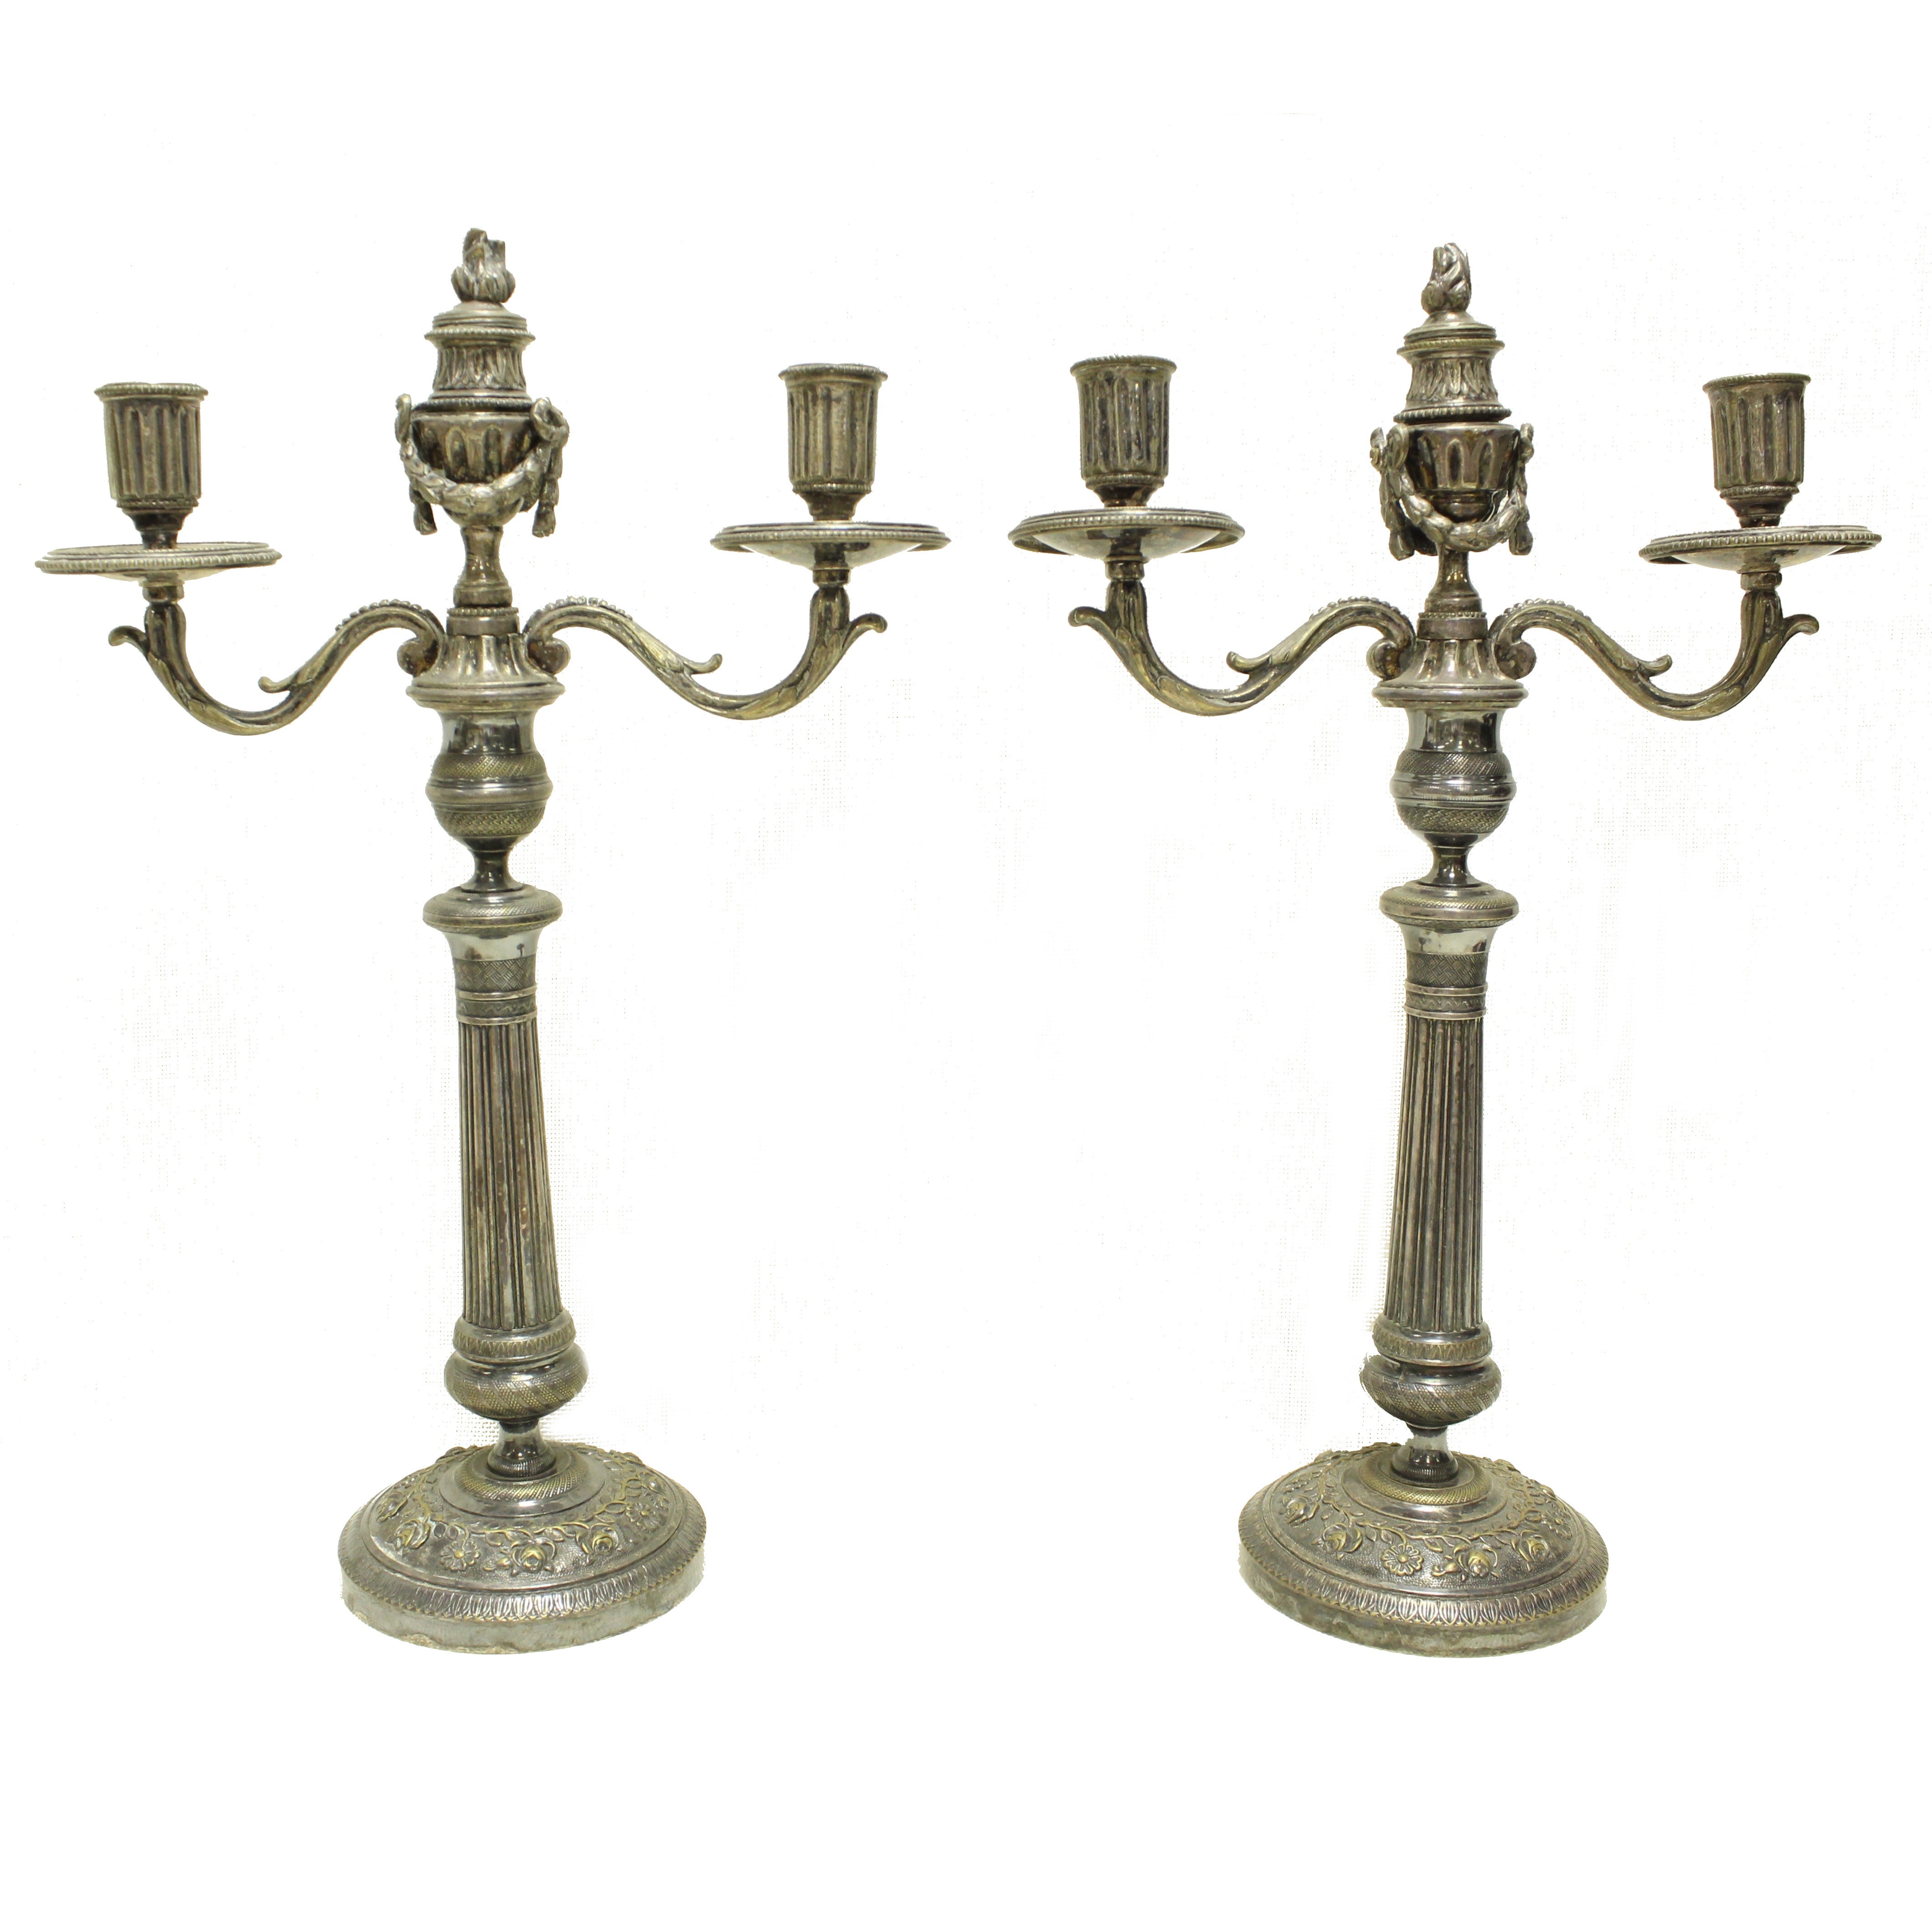 19c FrenchLouis XVI Silver-Plated Pair of Candelabras